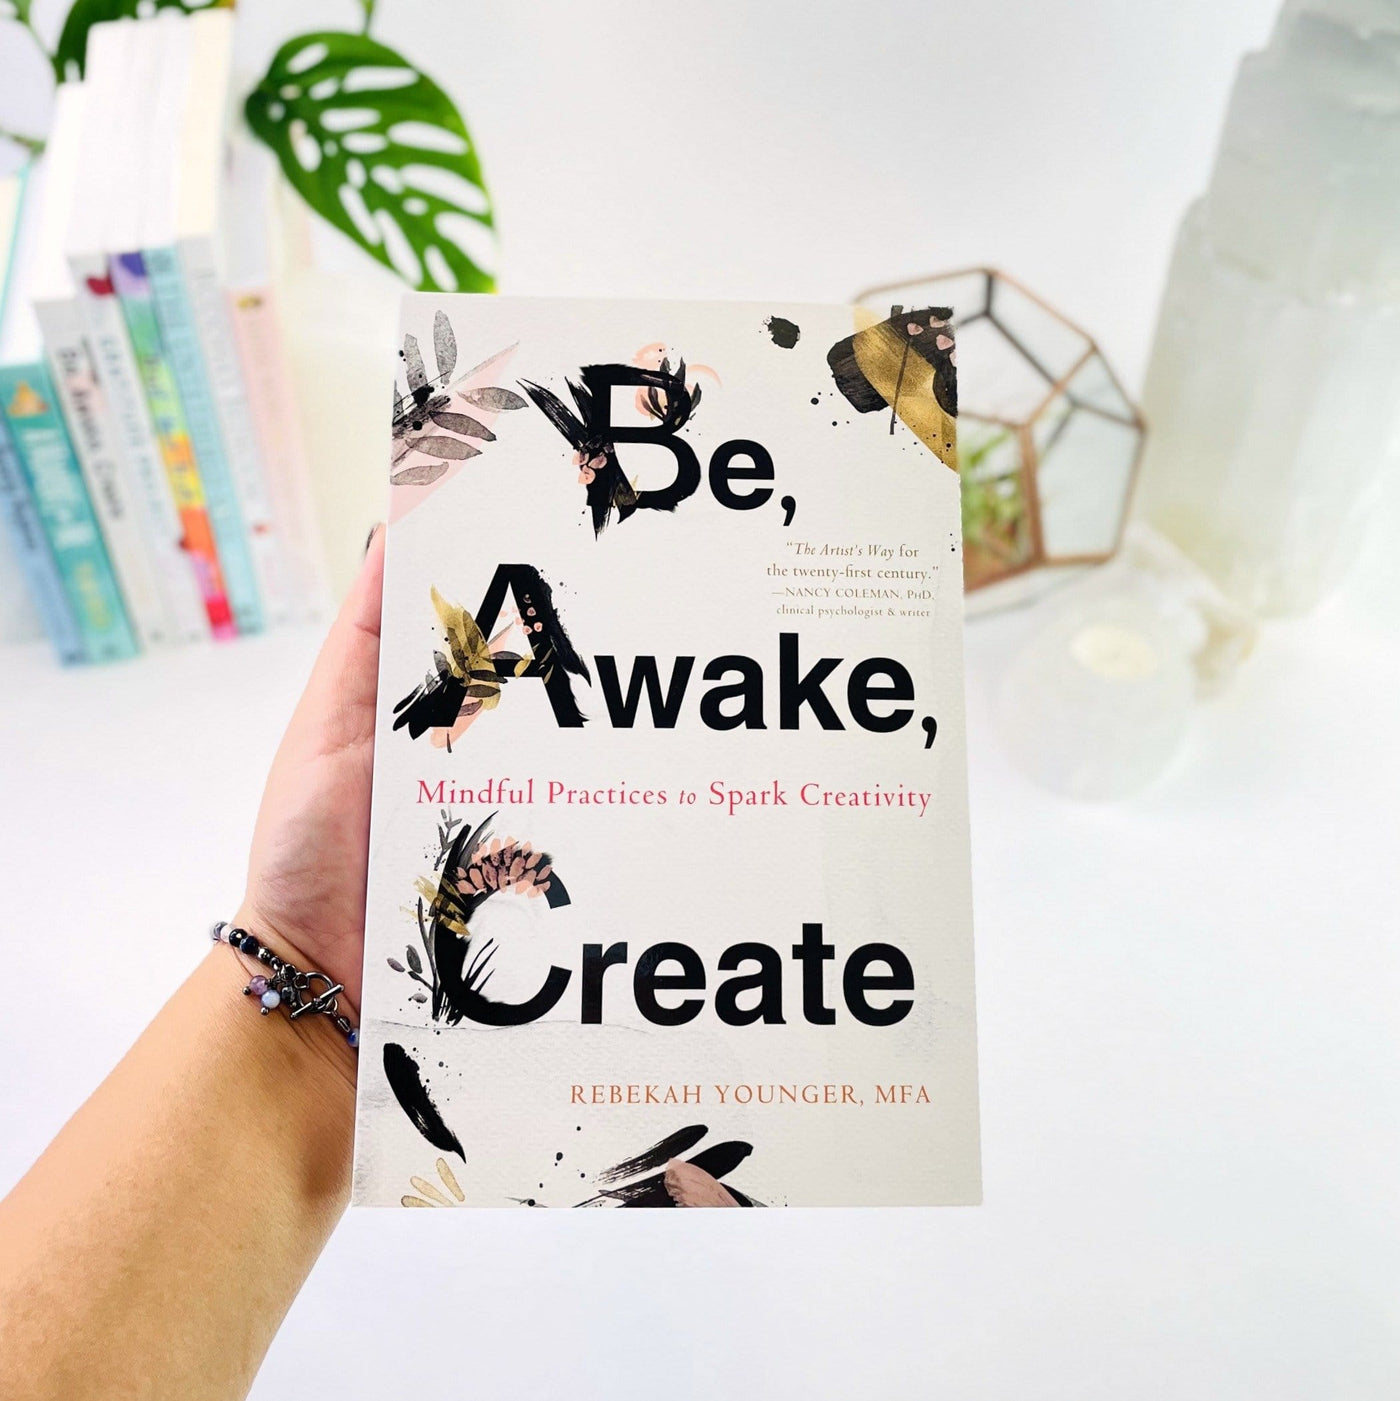 Be, Awake, Create book shown face up. Held in hand for size reference